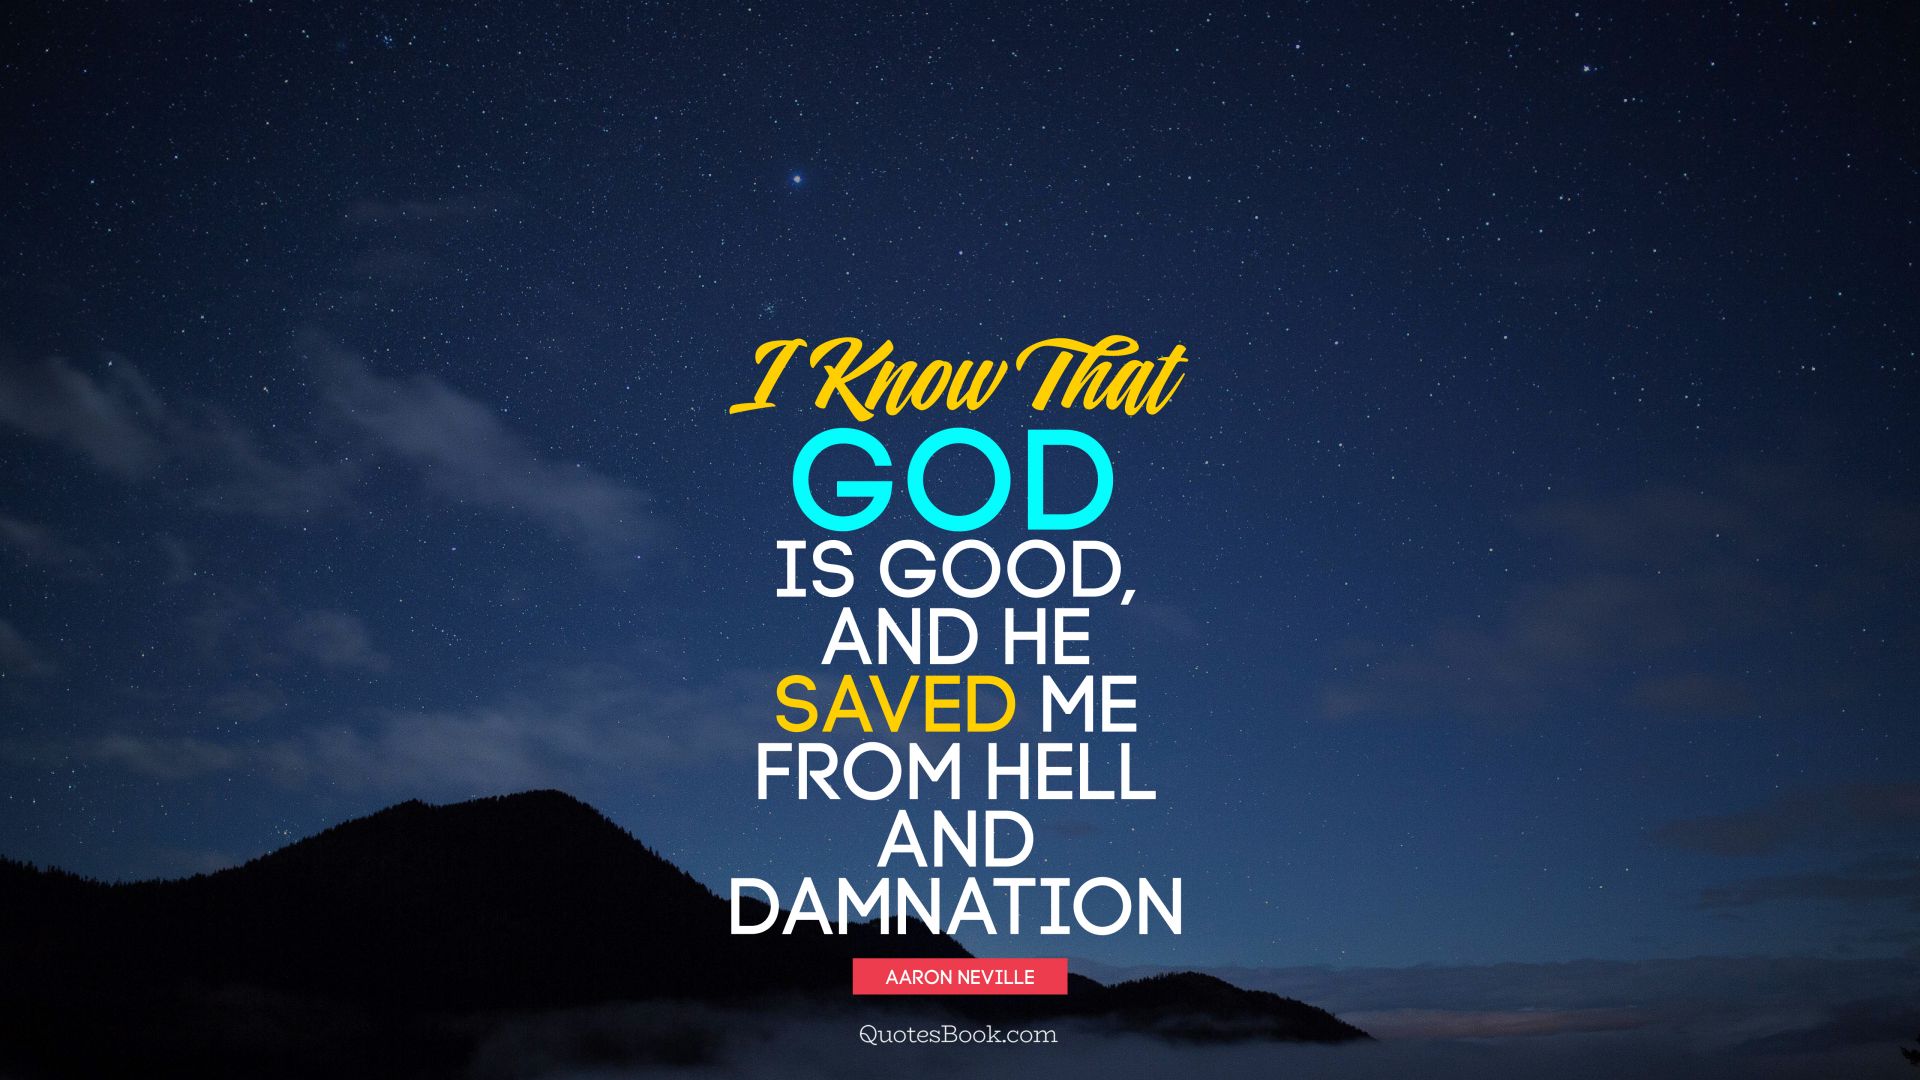 I know that God is good, and he saved me from hell and damnation. - Quote by Aaron Neville